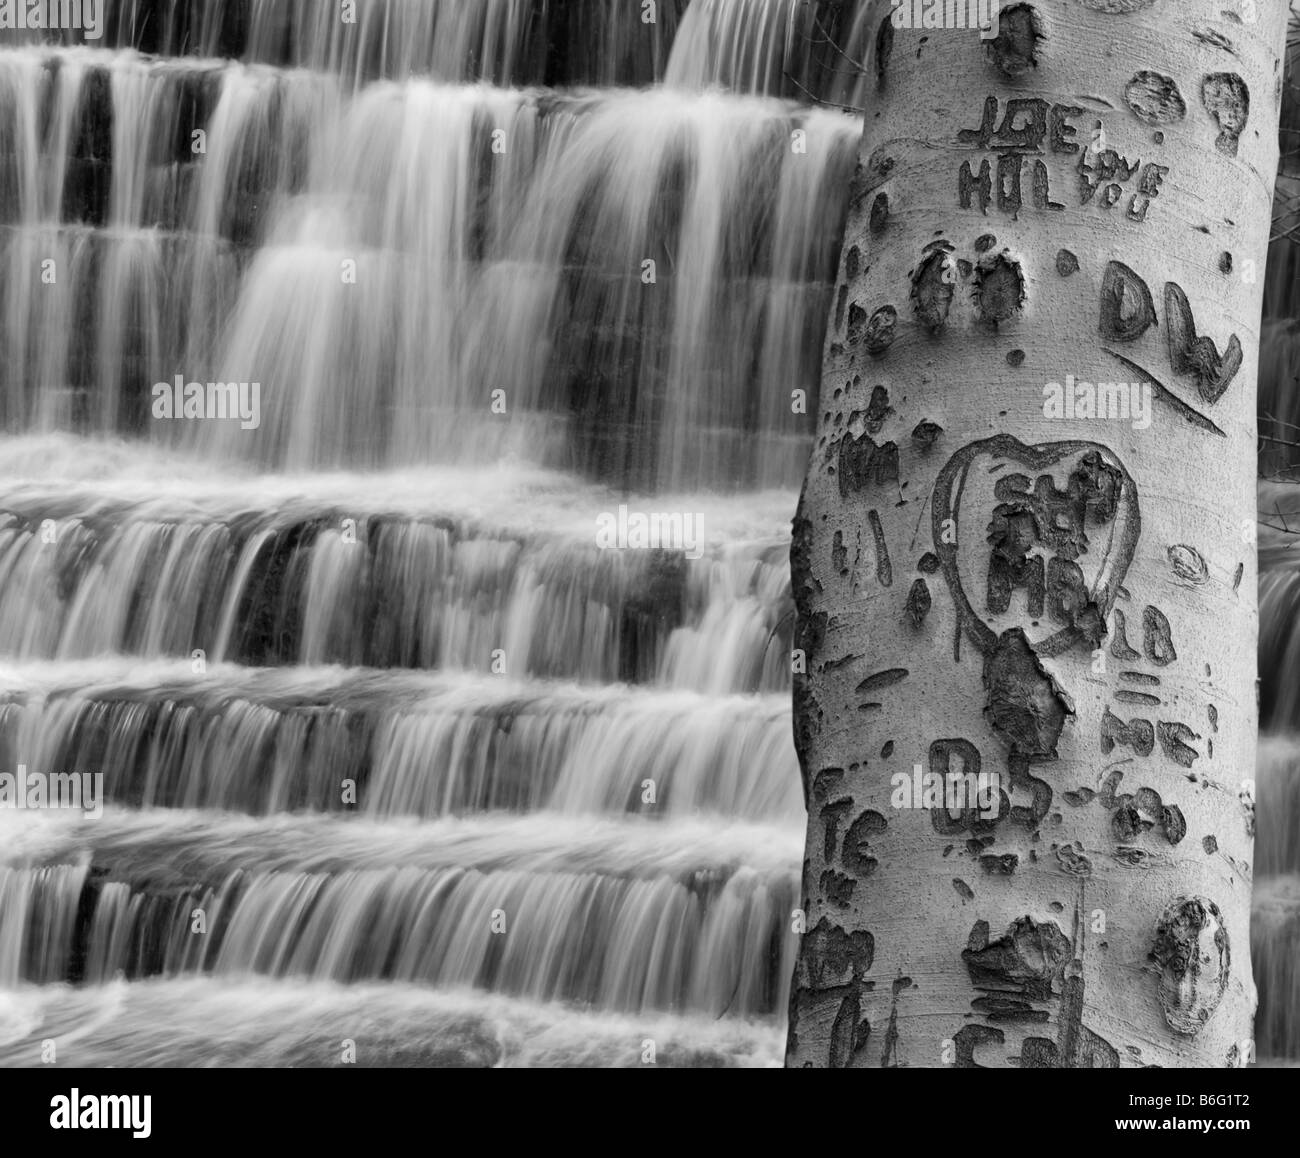 Tree with carved initials and waterfall Stock Photo